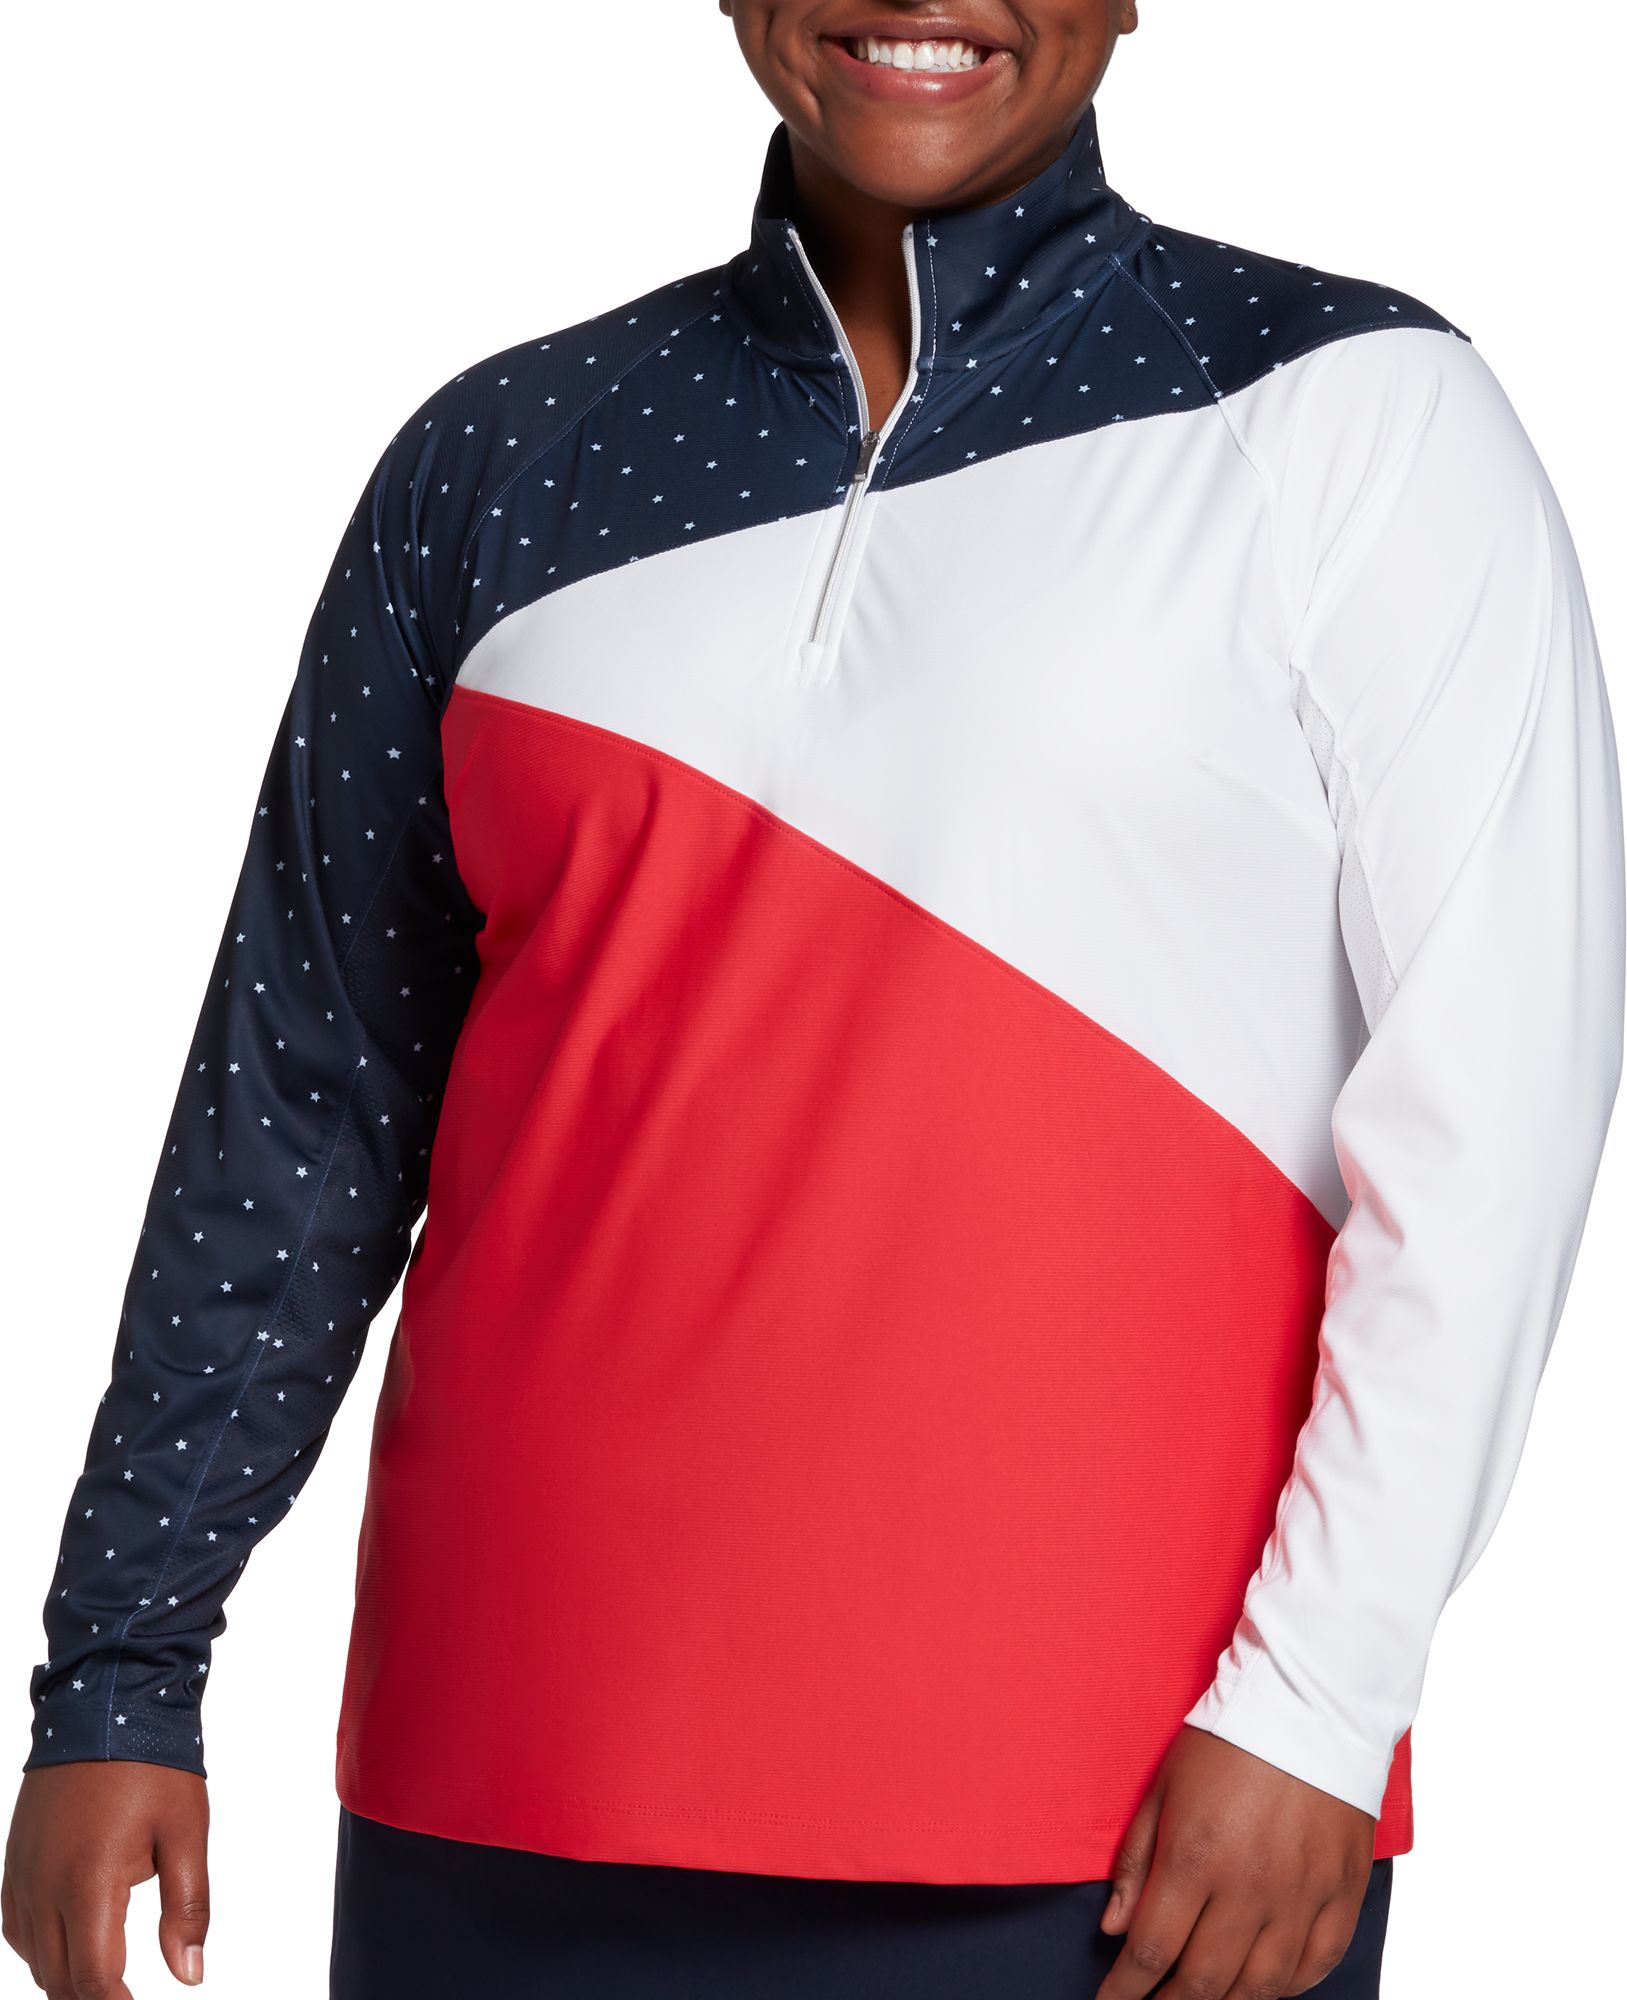 Women's Golf Sweaters & Pullovers | Curbside Pickup Available at DICK'S